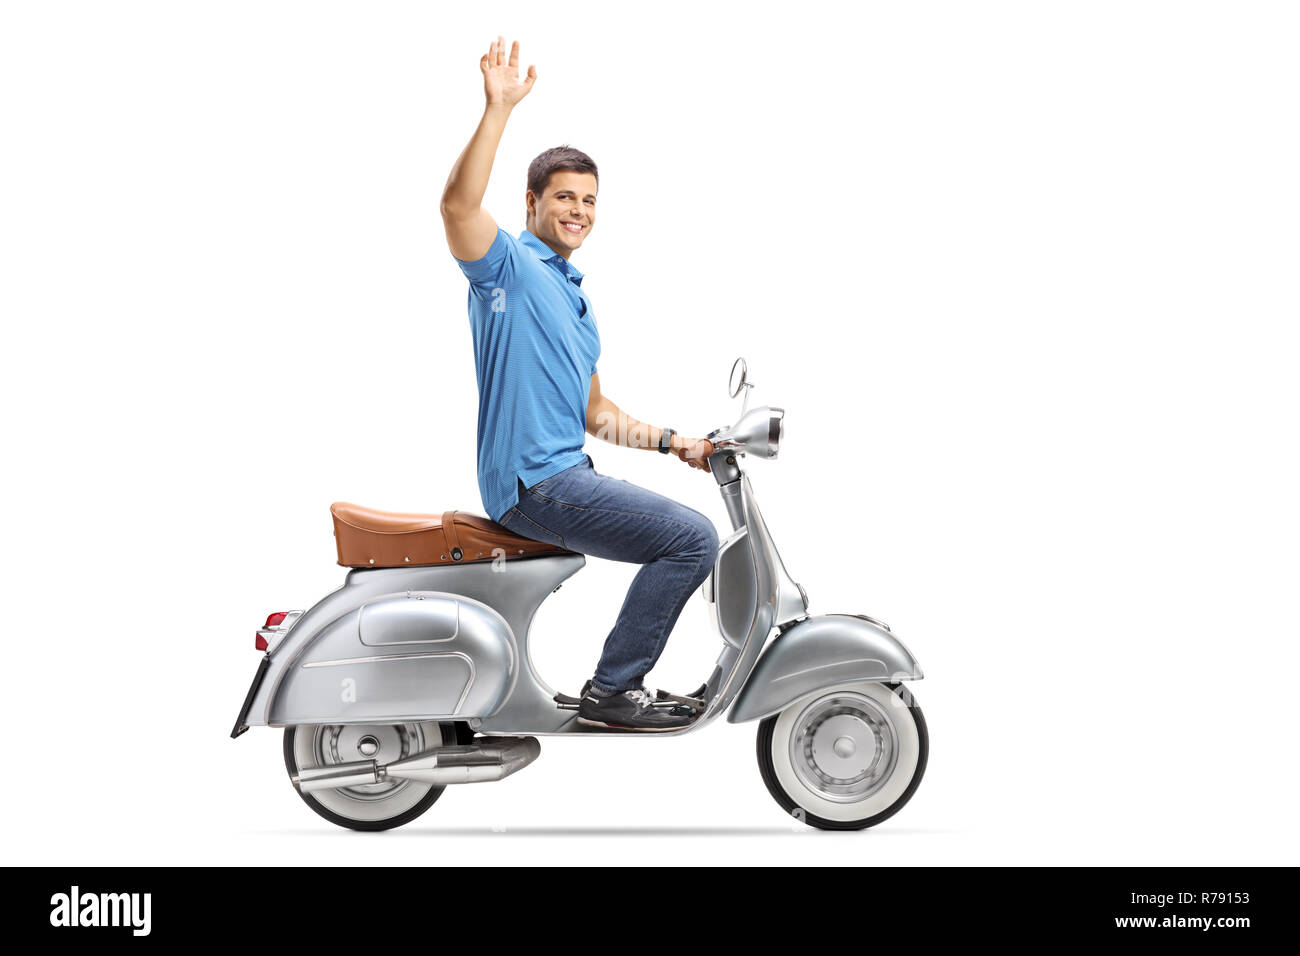 Full length shot of a young man riding a vintage scooter and waving isolated on white background Stock Photo